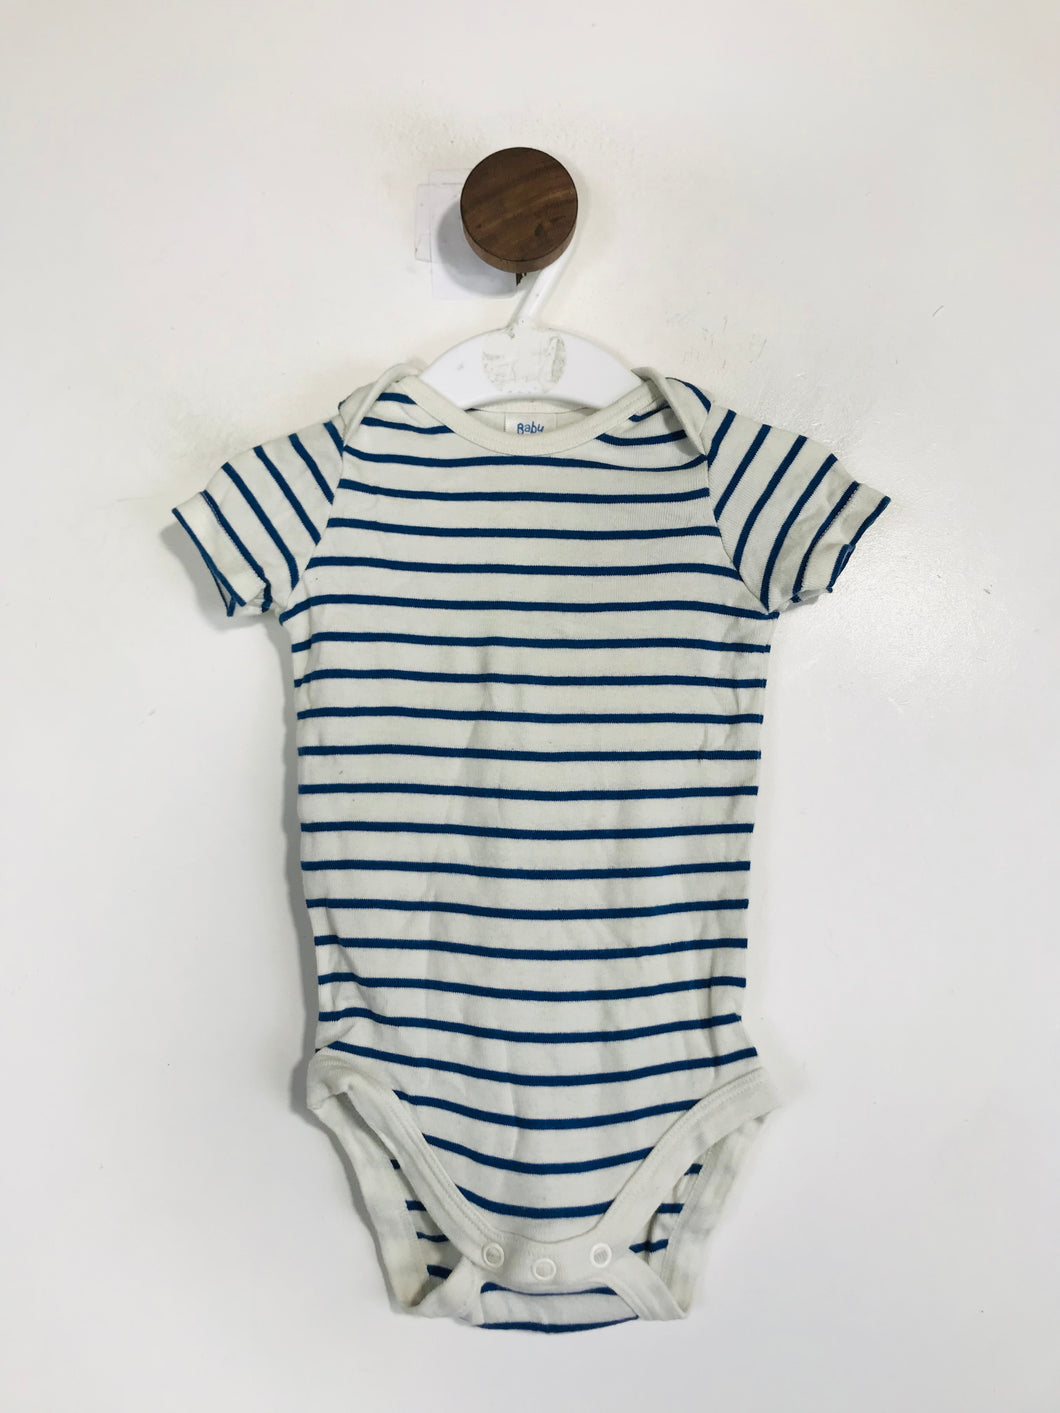 Baby Boden Kid's Striped Babygrow Playsuit | 6-12 Months | White